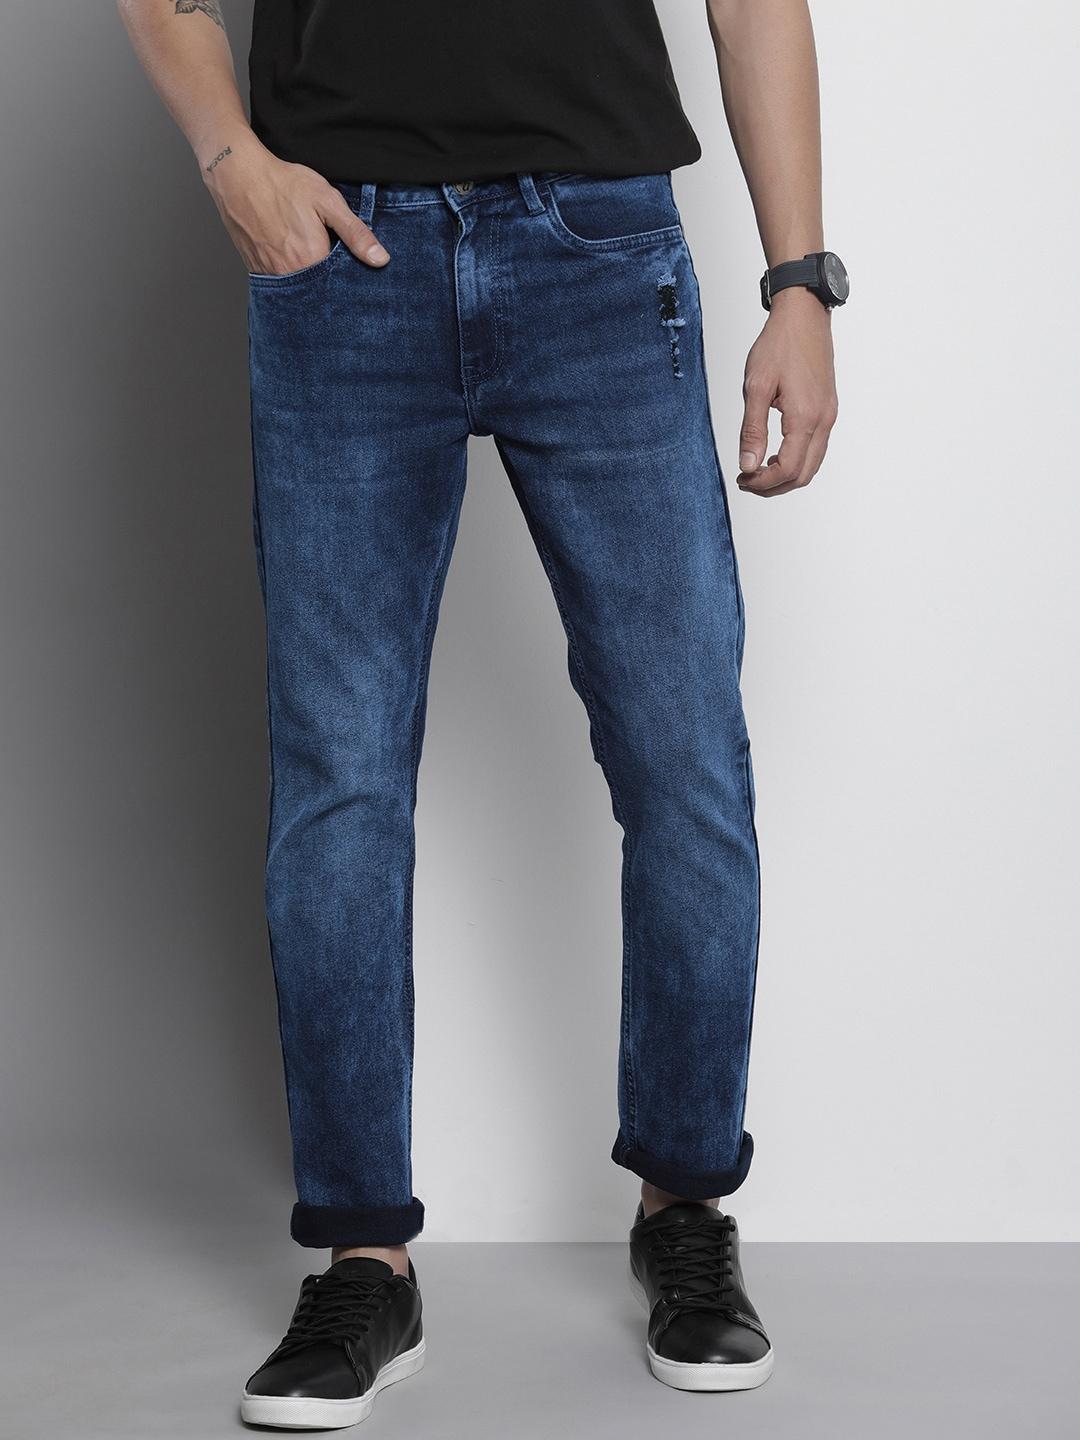 The Indian Garage Co Men Navy Blue Straight Fit Light Fade Jeans